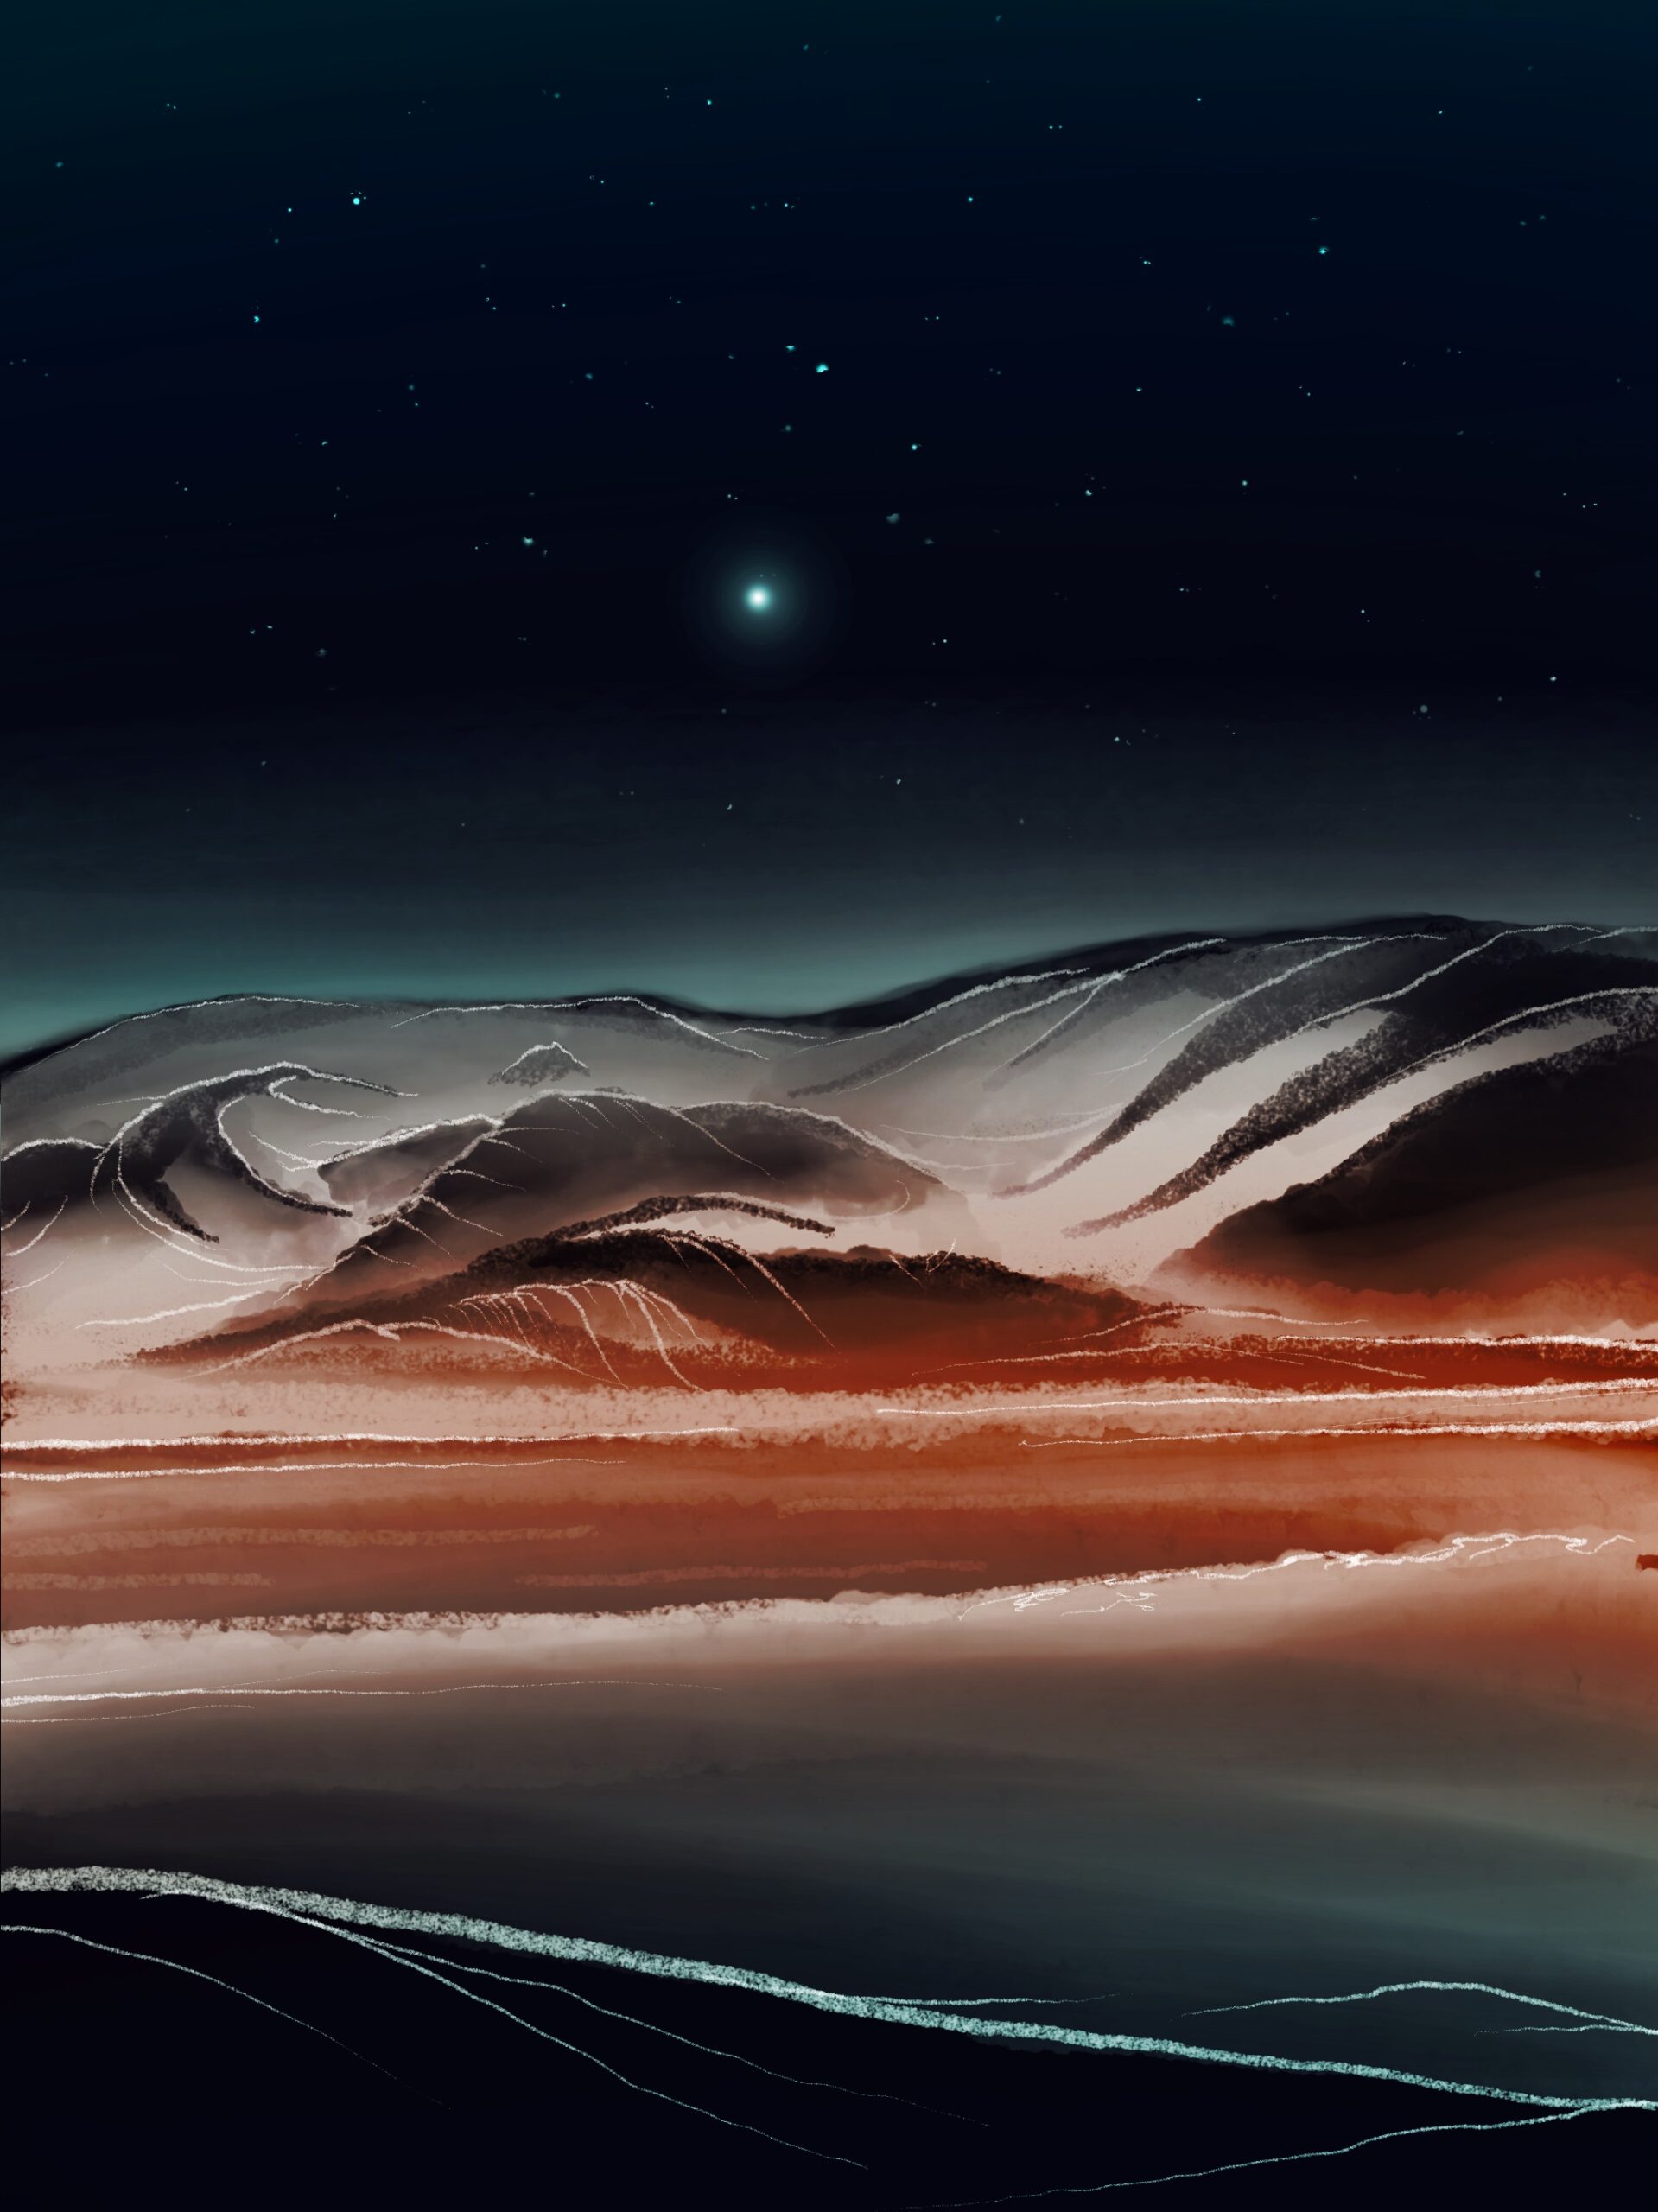 Digital painting of the surface of Mars, with a thin atmosphere and a black sky with stars.